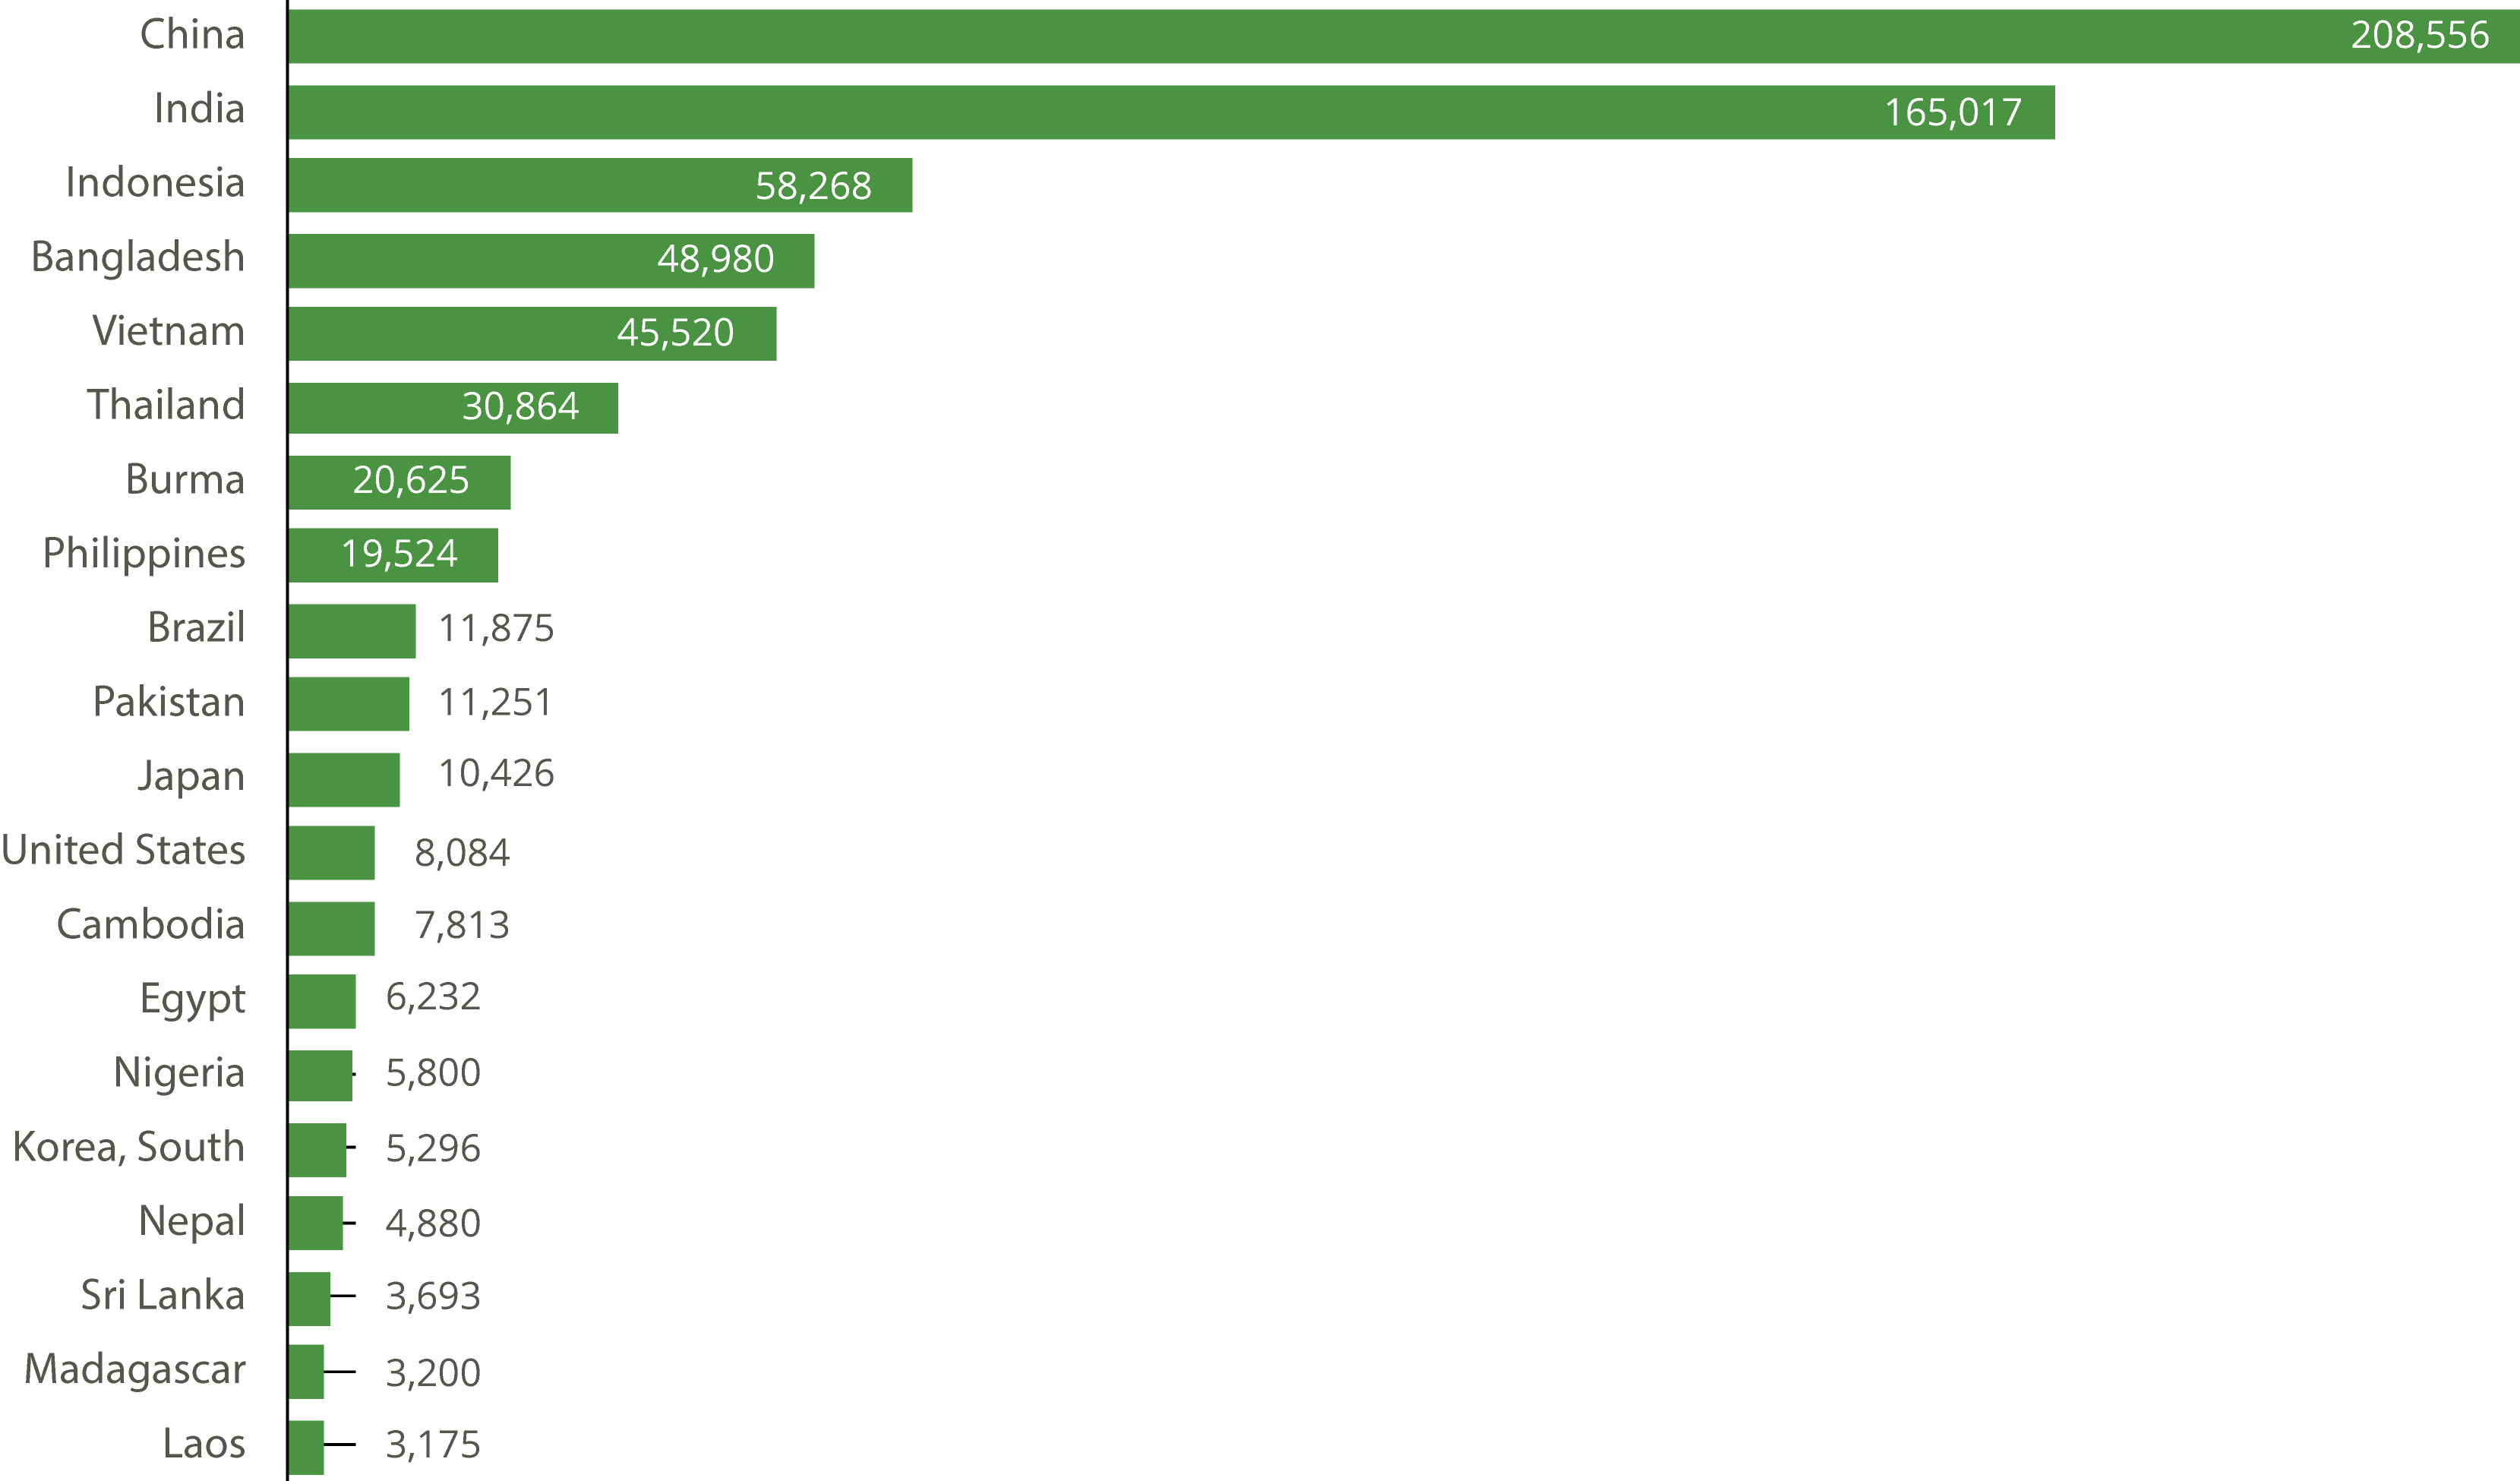 World&#39;s Top 20 Rice Producers, 2017